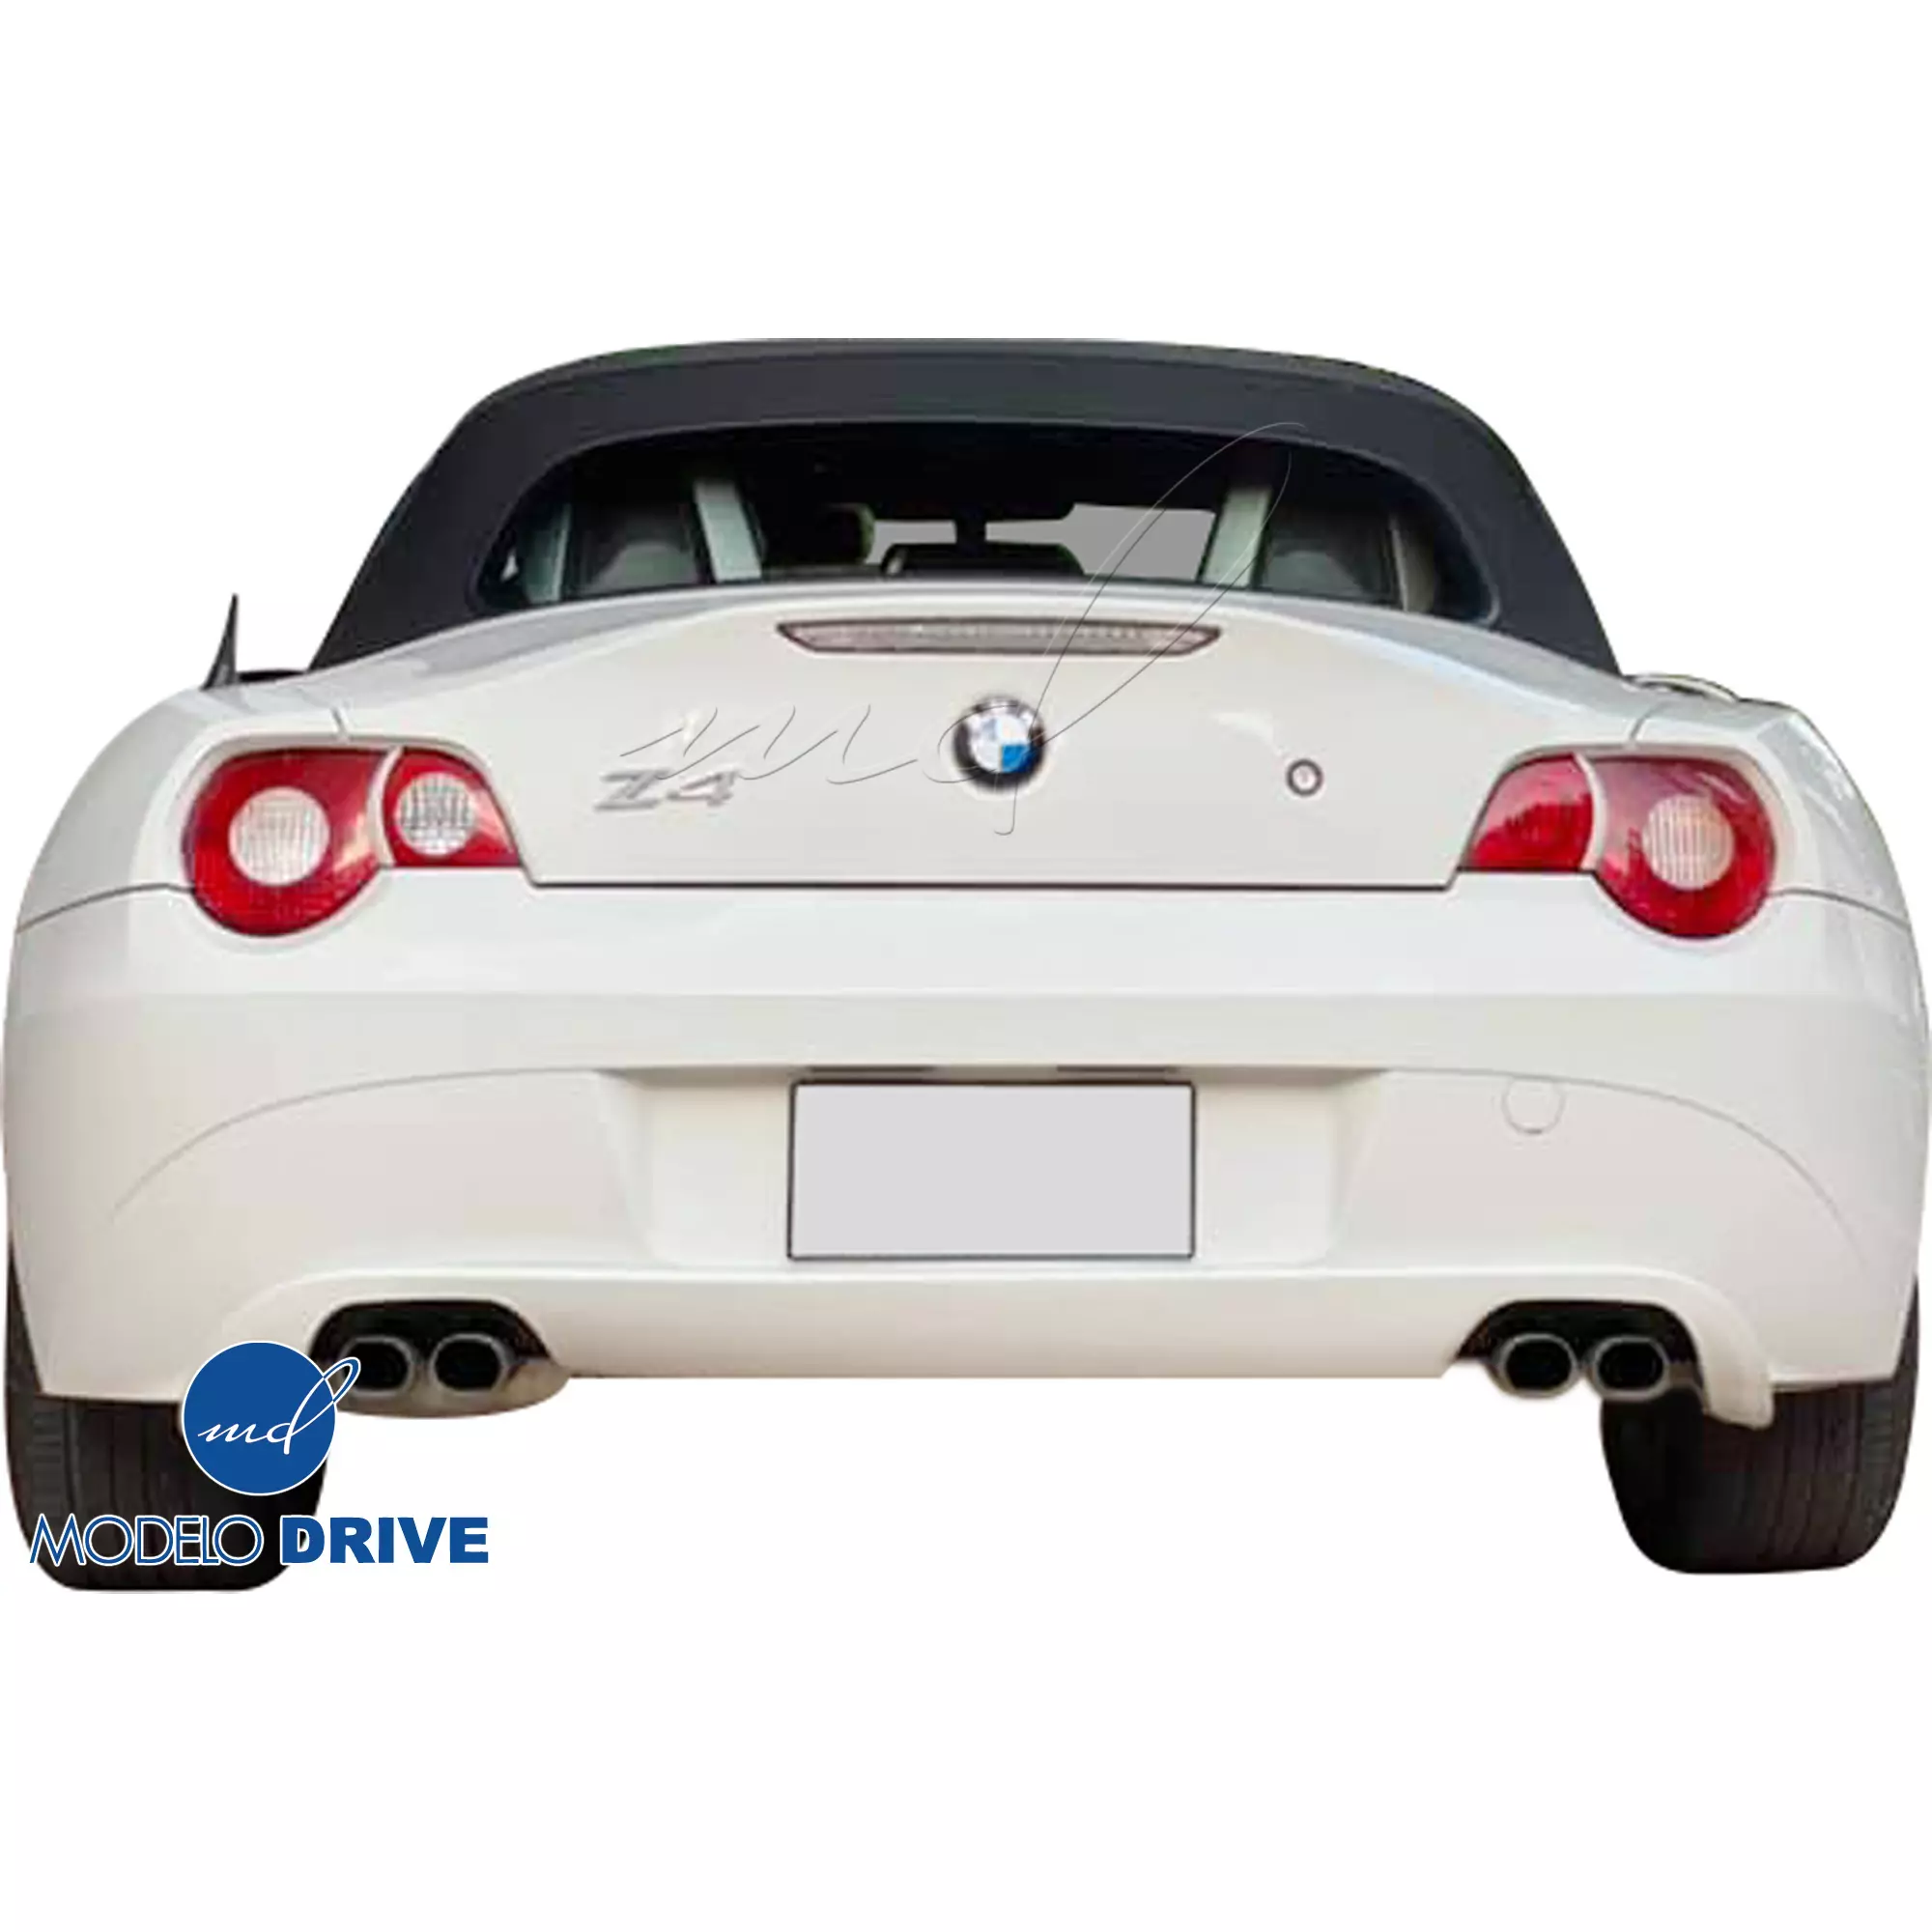 ModeloDrive FRP AERO Diffuser (dual exhst cut outs) > BMW Z4 E85 2003-2005 - Image 3